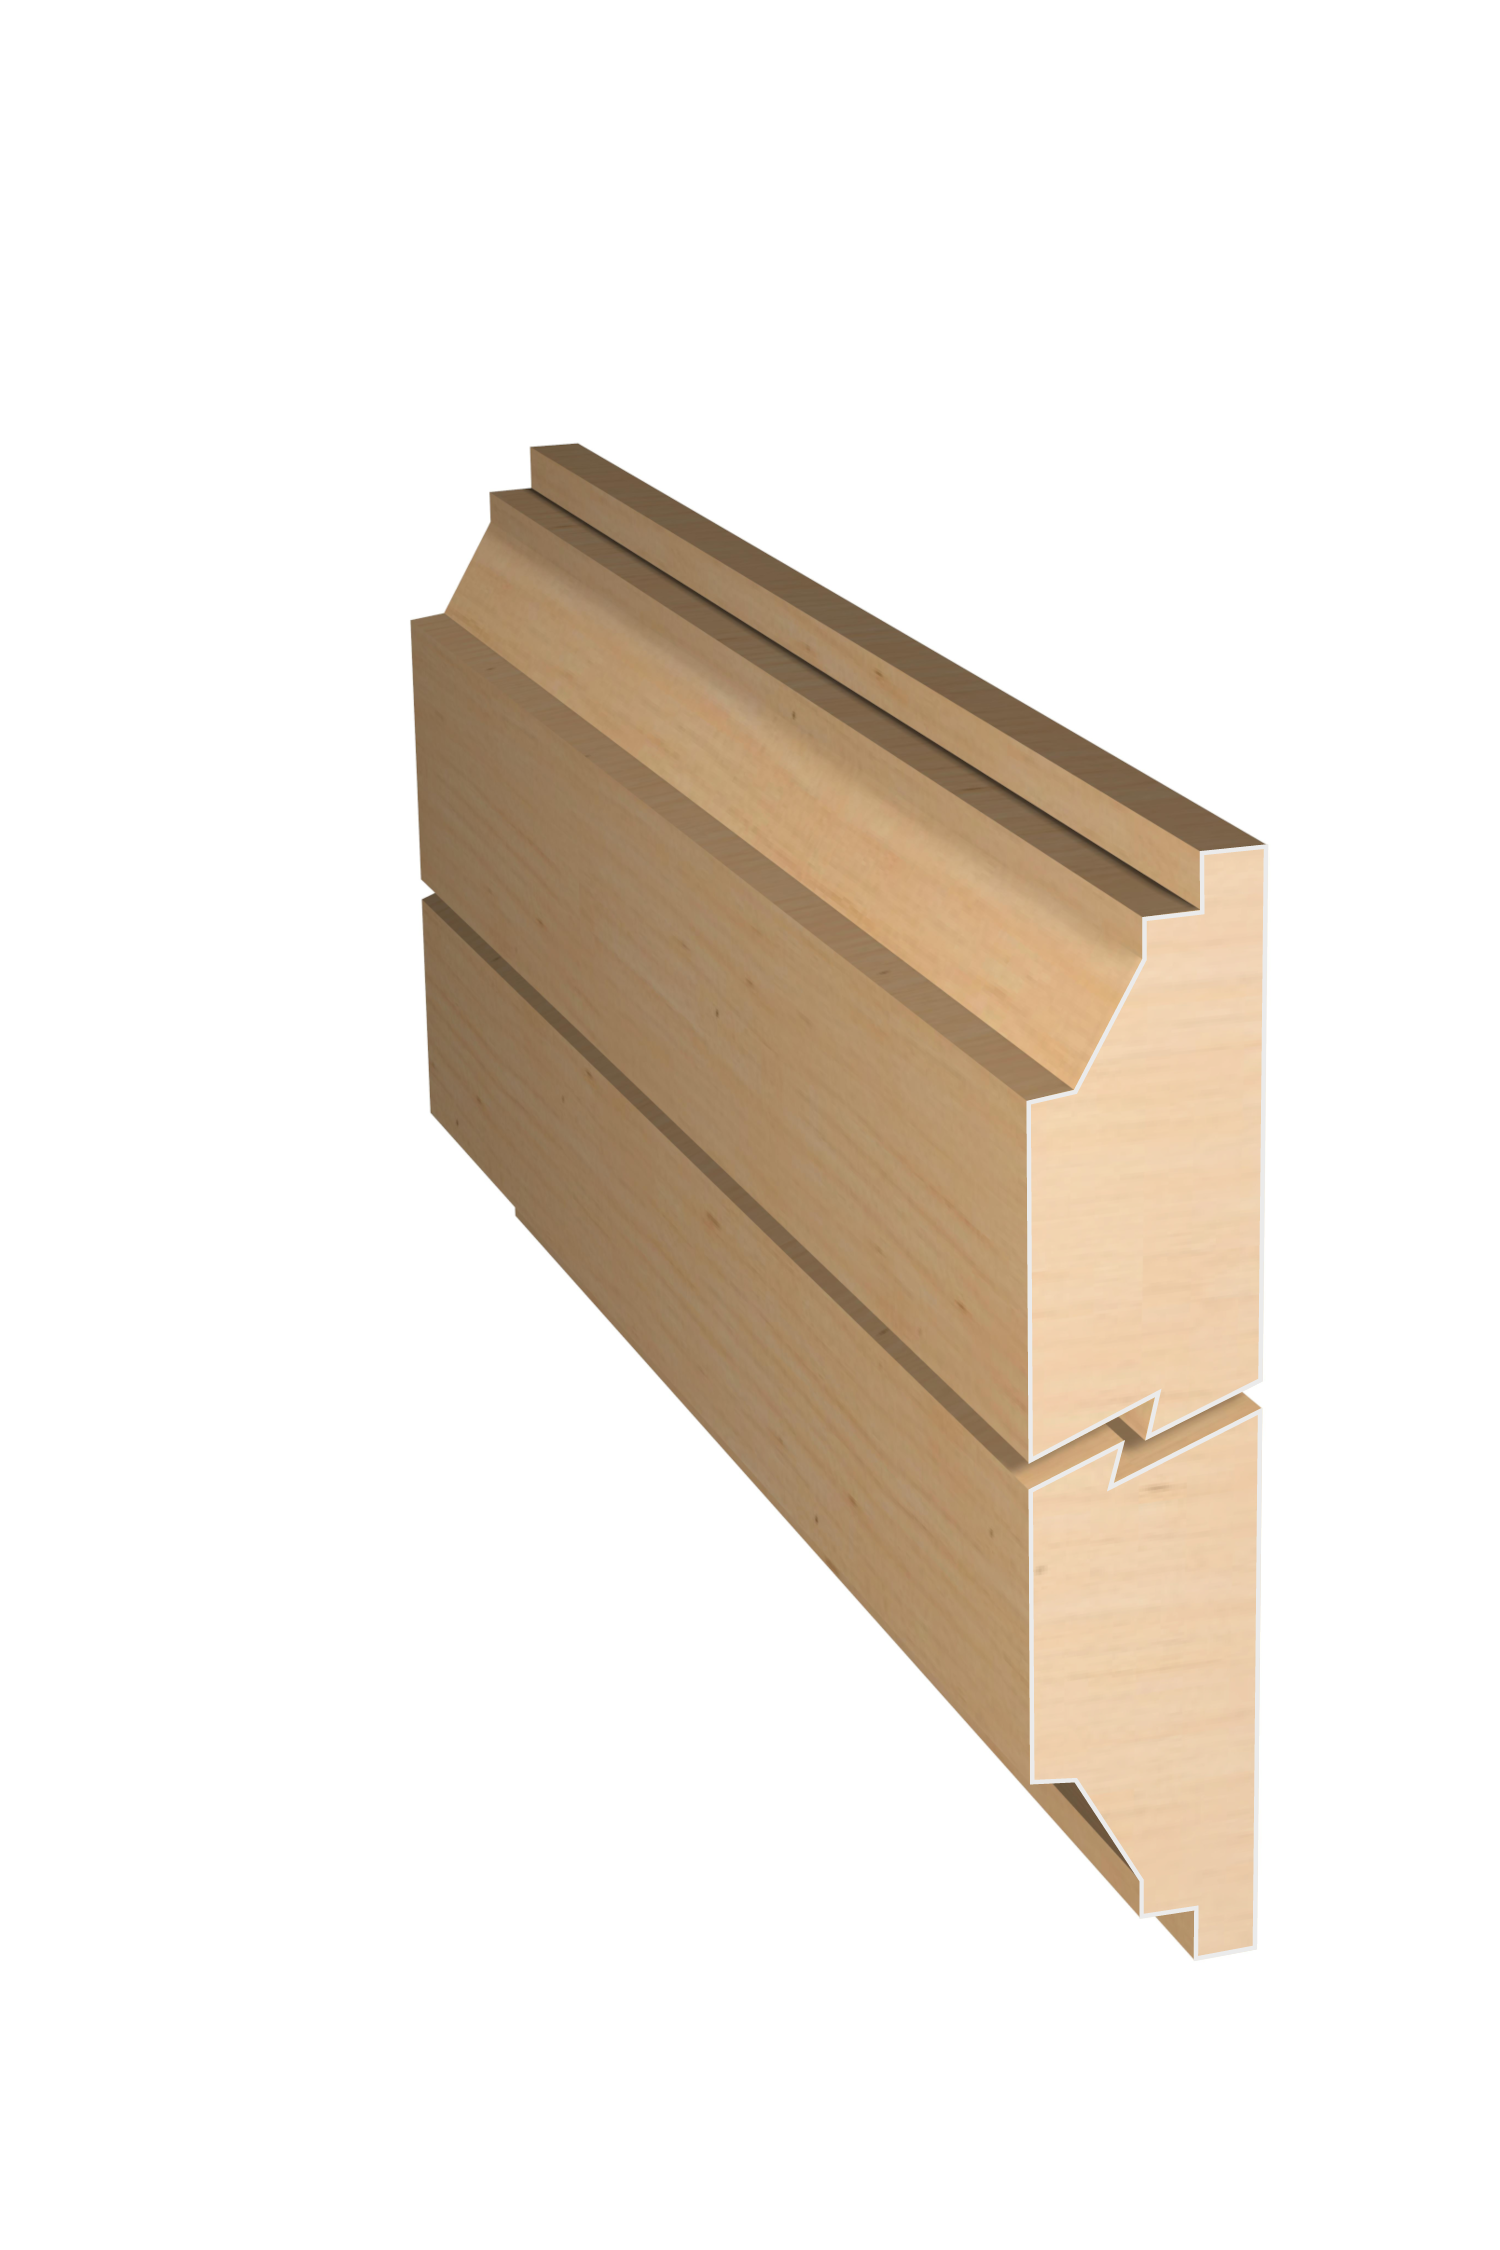 Three dimensional rendering of custom edge profile wood molding SKPL25 made by Public Lumber Company in Detroit.